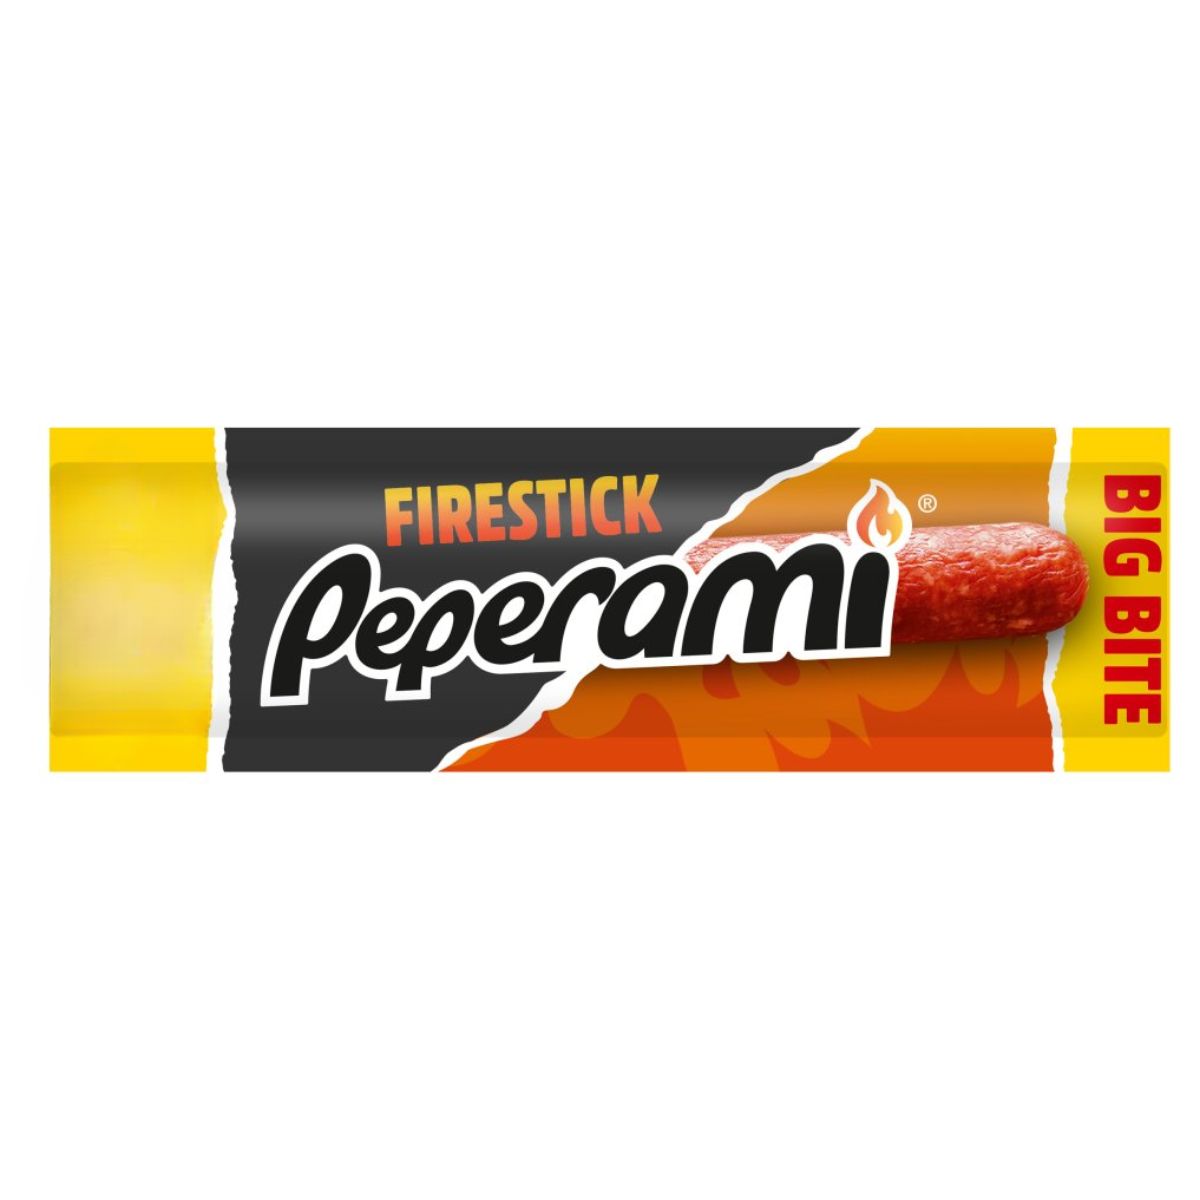 Peperami - Firestick Sausage - 28g labeled "big bite" on a fiery background with the image of a spicy red meat stick.